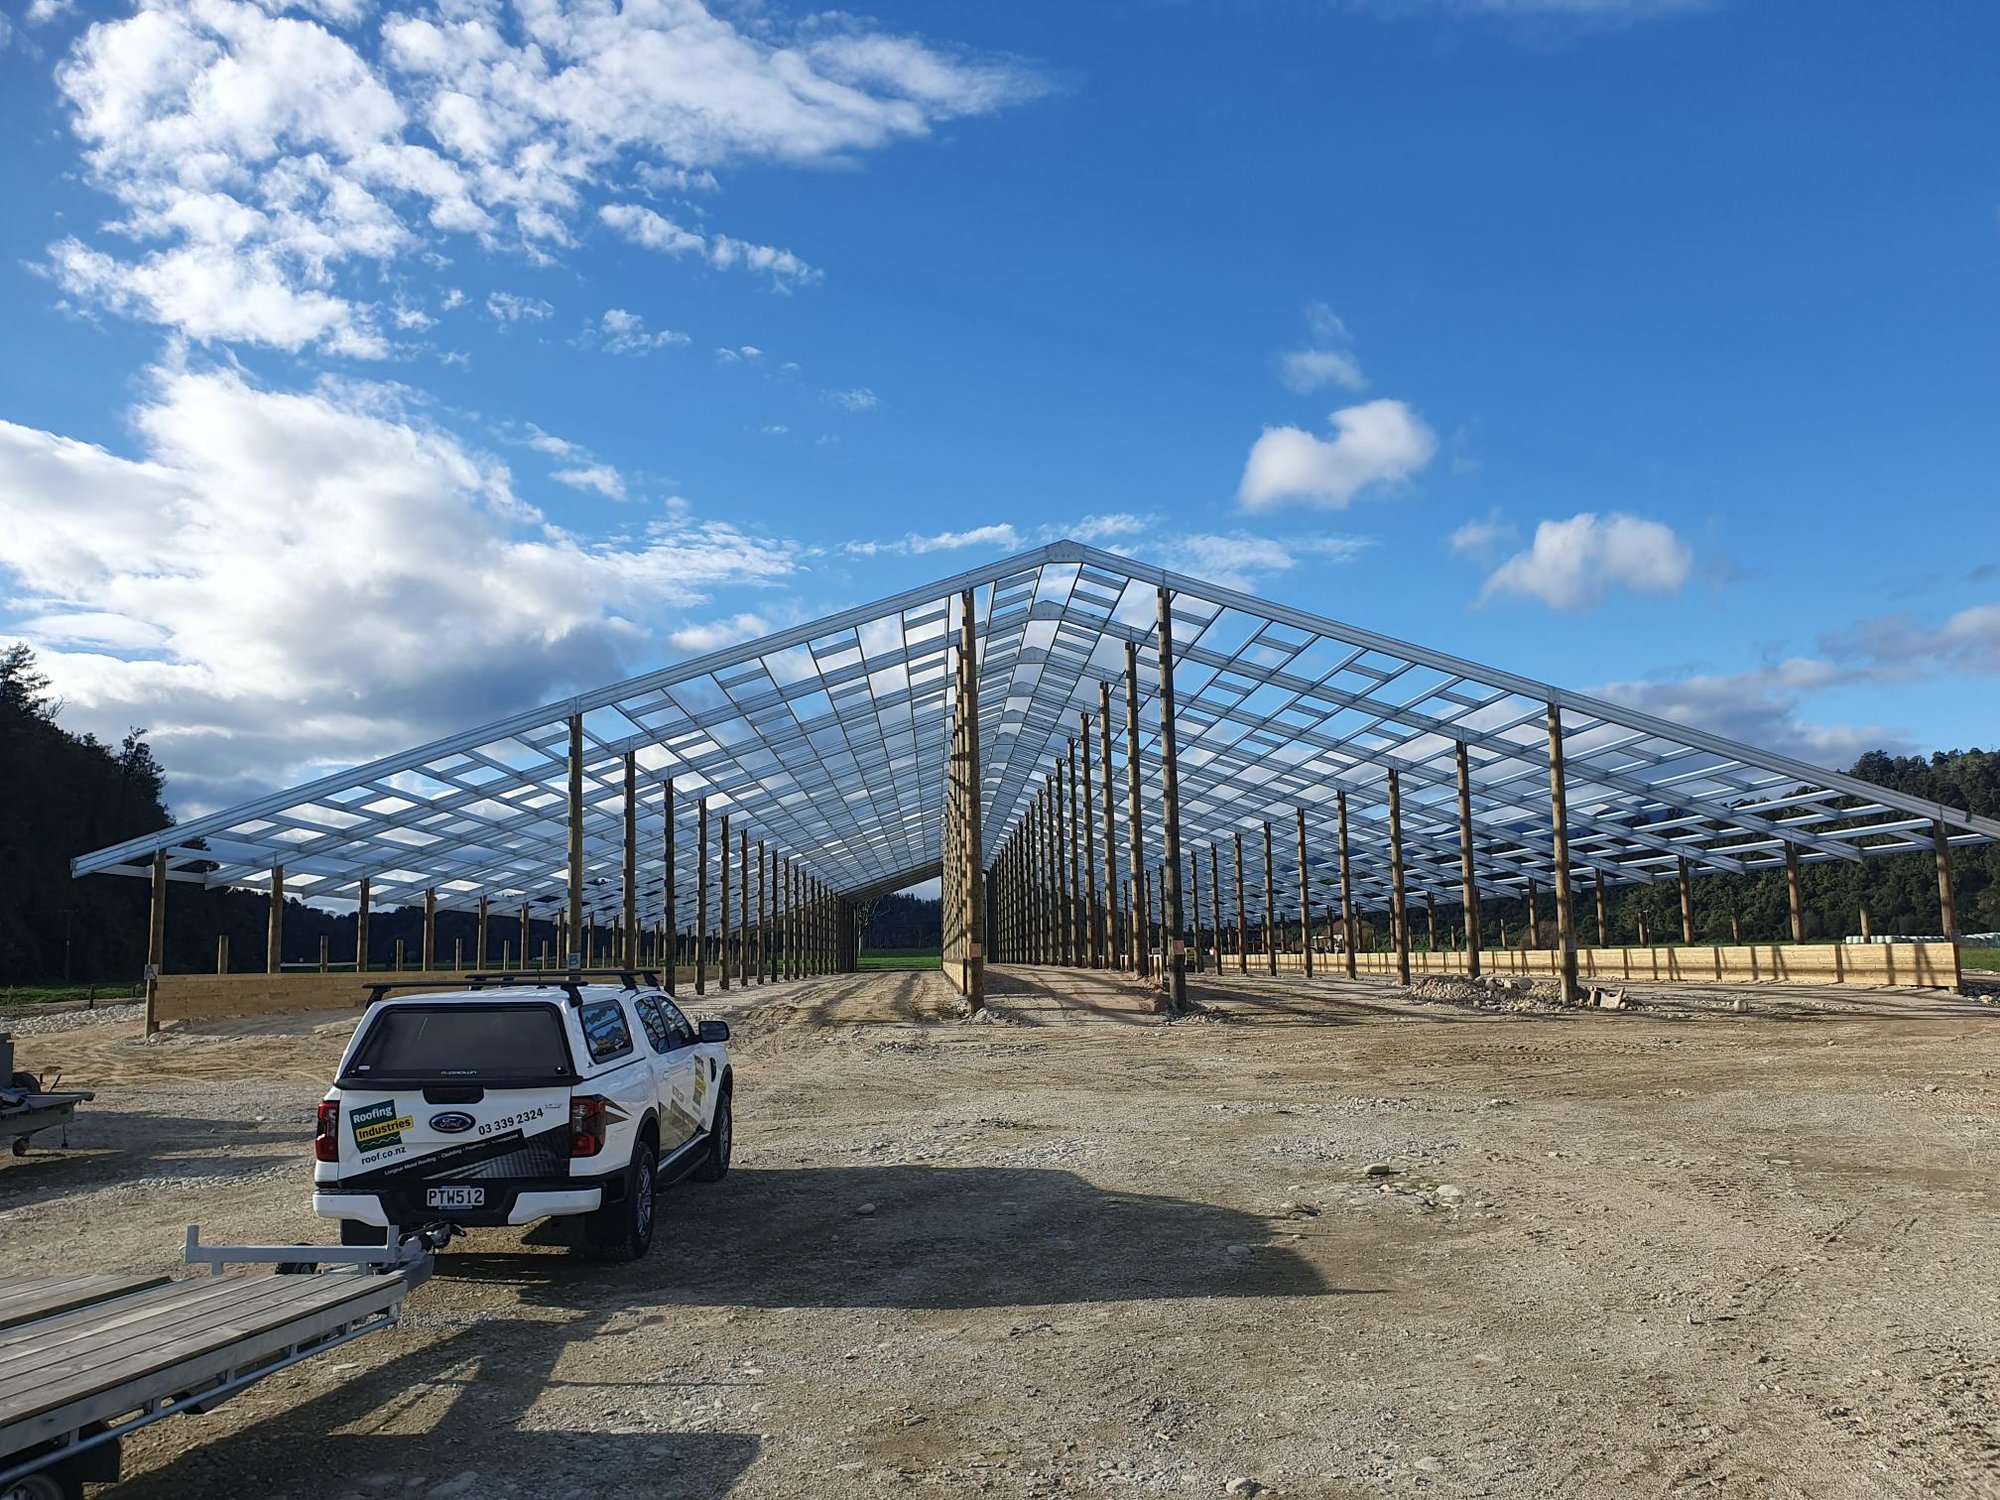 volckman Aztech composting barn during construction